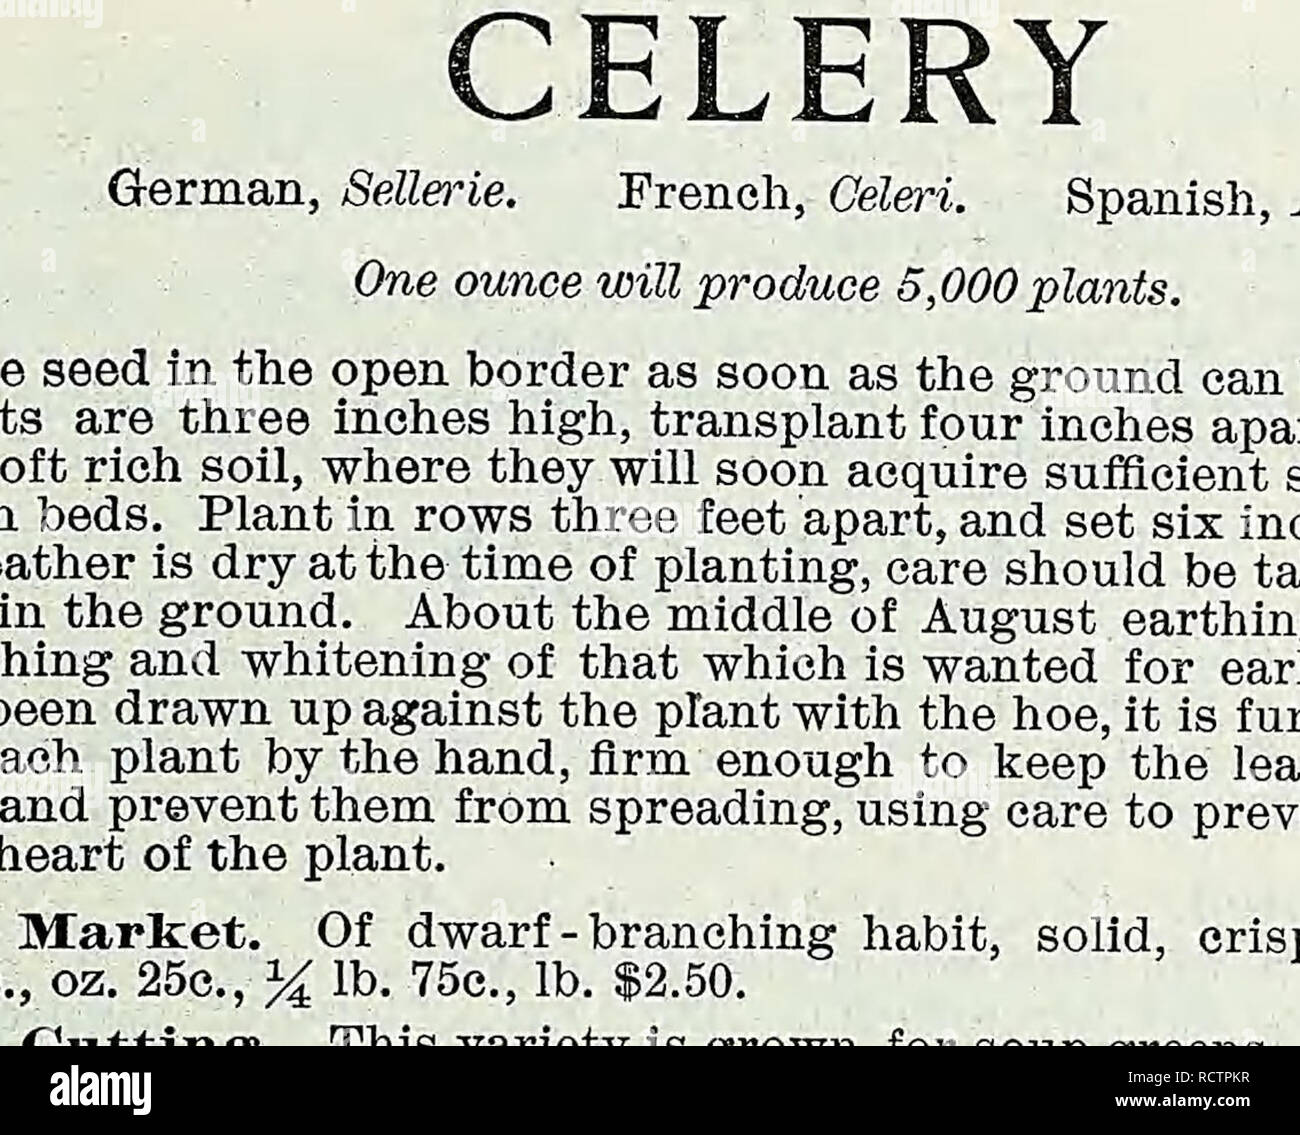 . Descriptive catalogue of vegetable, flower, and farm seeds. Nurseries (Horticulture); Nursery stock; Seeds; Bulbs (Plants); Gardening; Equipment and supplies; Bedding plants; Weeber &amp; Don. Vegetable Seeds 16 WEEBER U DON. CHERVIL German, Kerbel. French, CerfeuU. Spanish. Perifollo. The Curled Chervil is cultivated like Parsley, and used for garnishing and flavoring soups and salads. The seed of the tuberous rooted is sown in August, and treated like the Carrot. Curled Chervil. The young leaves are used for flavoring soups and salads. Pkt. 5c, oz. 10c, % lb. 30c, lb. $1.00. Tuberous Roote Stock Photo